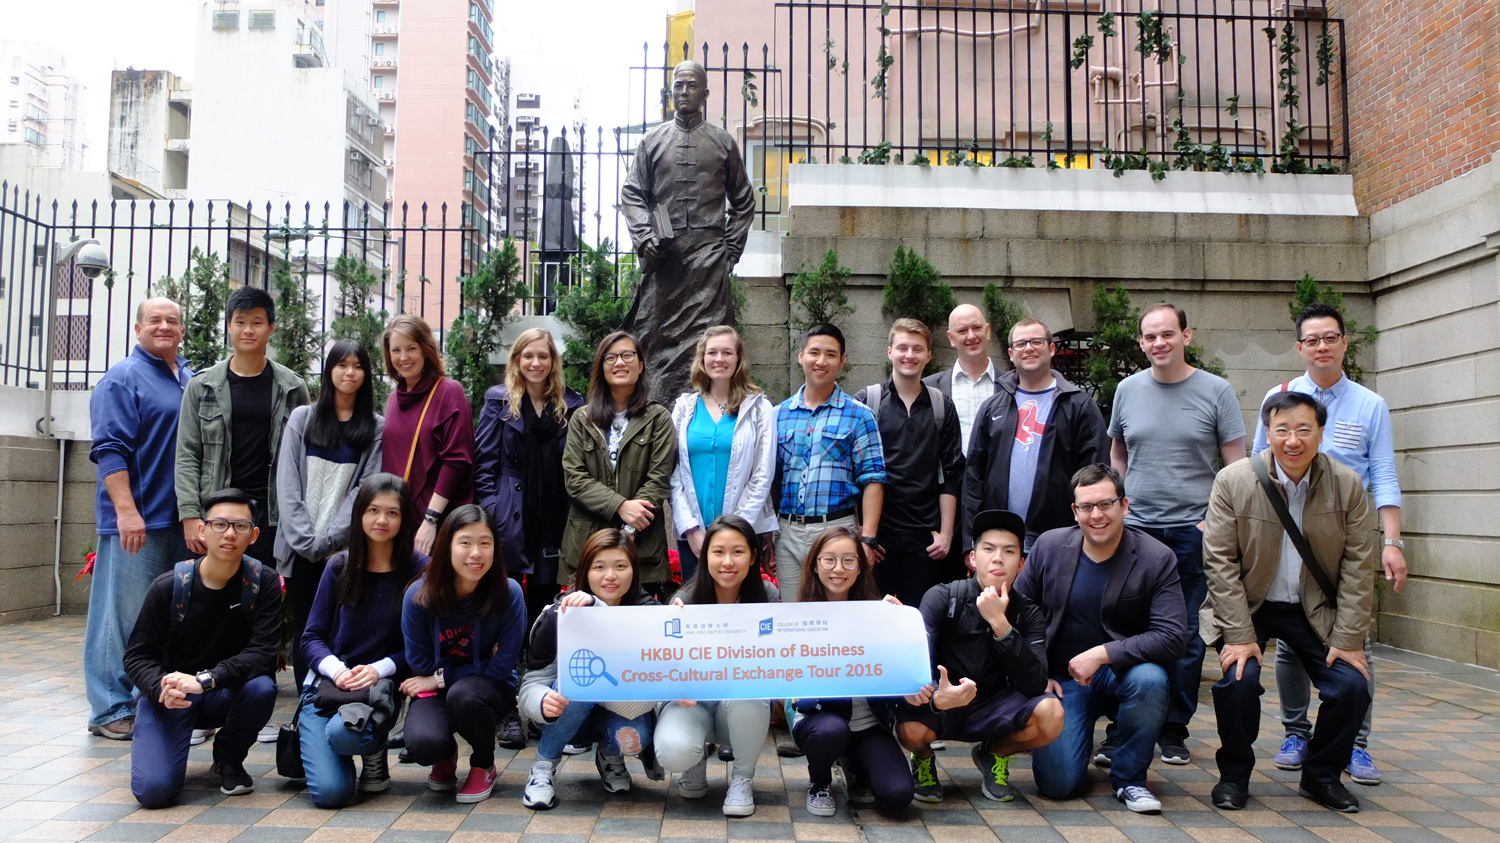 Through the cross-cultural exchange tour, students from Hong Kong and America had a deeper mutual understanding about the lifestyle of each other.